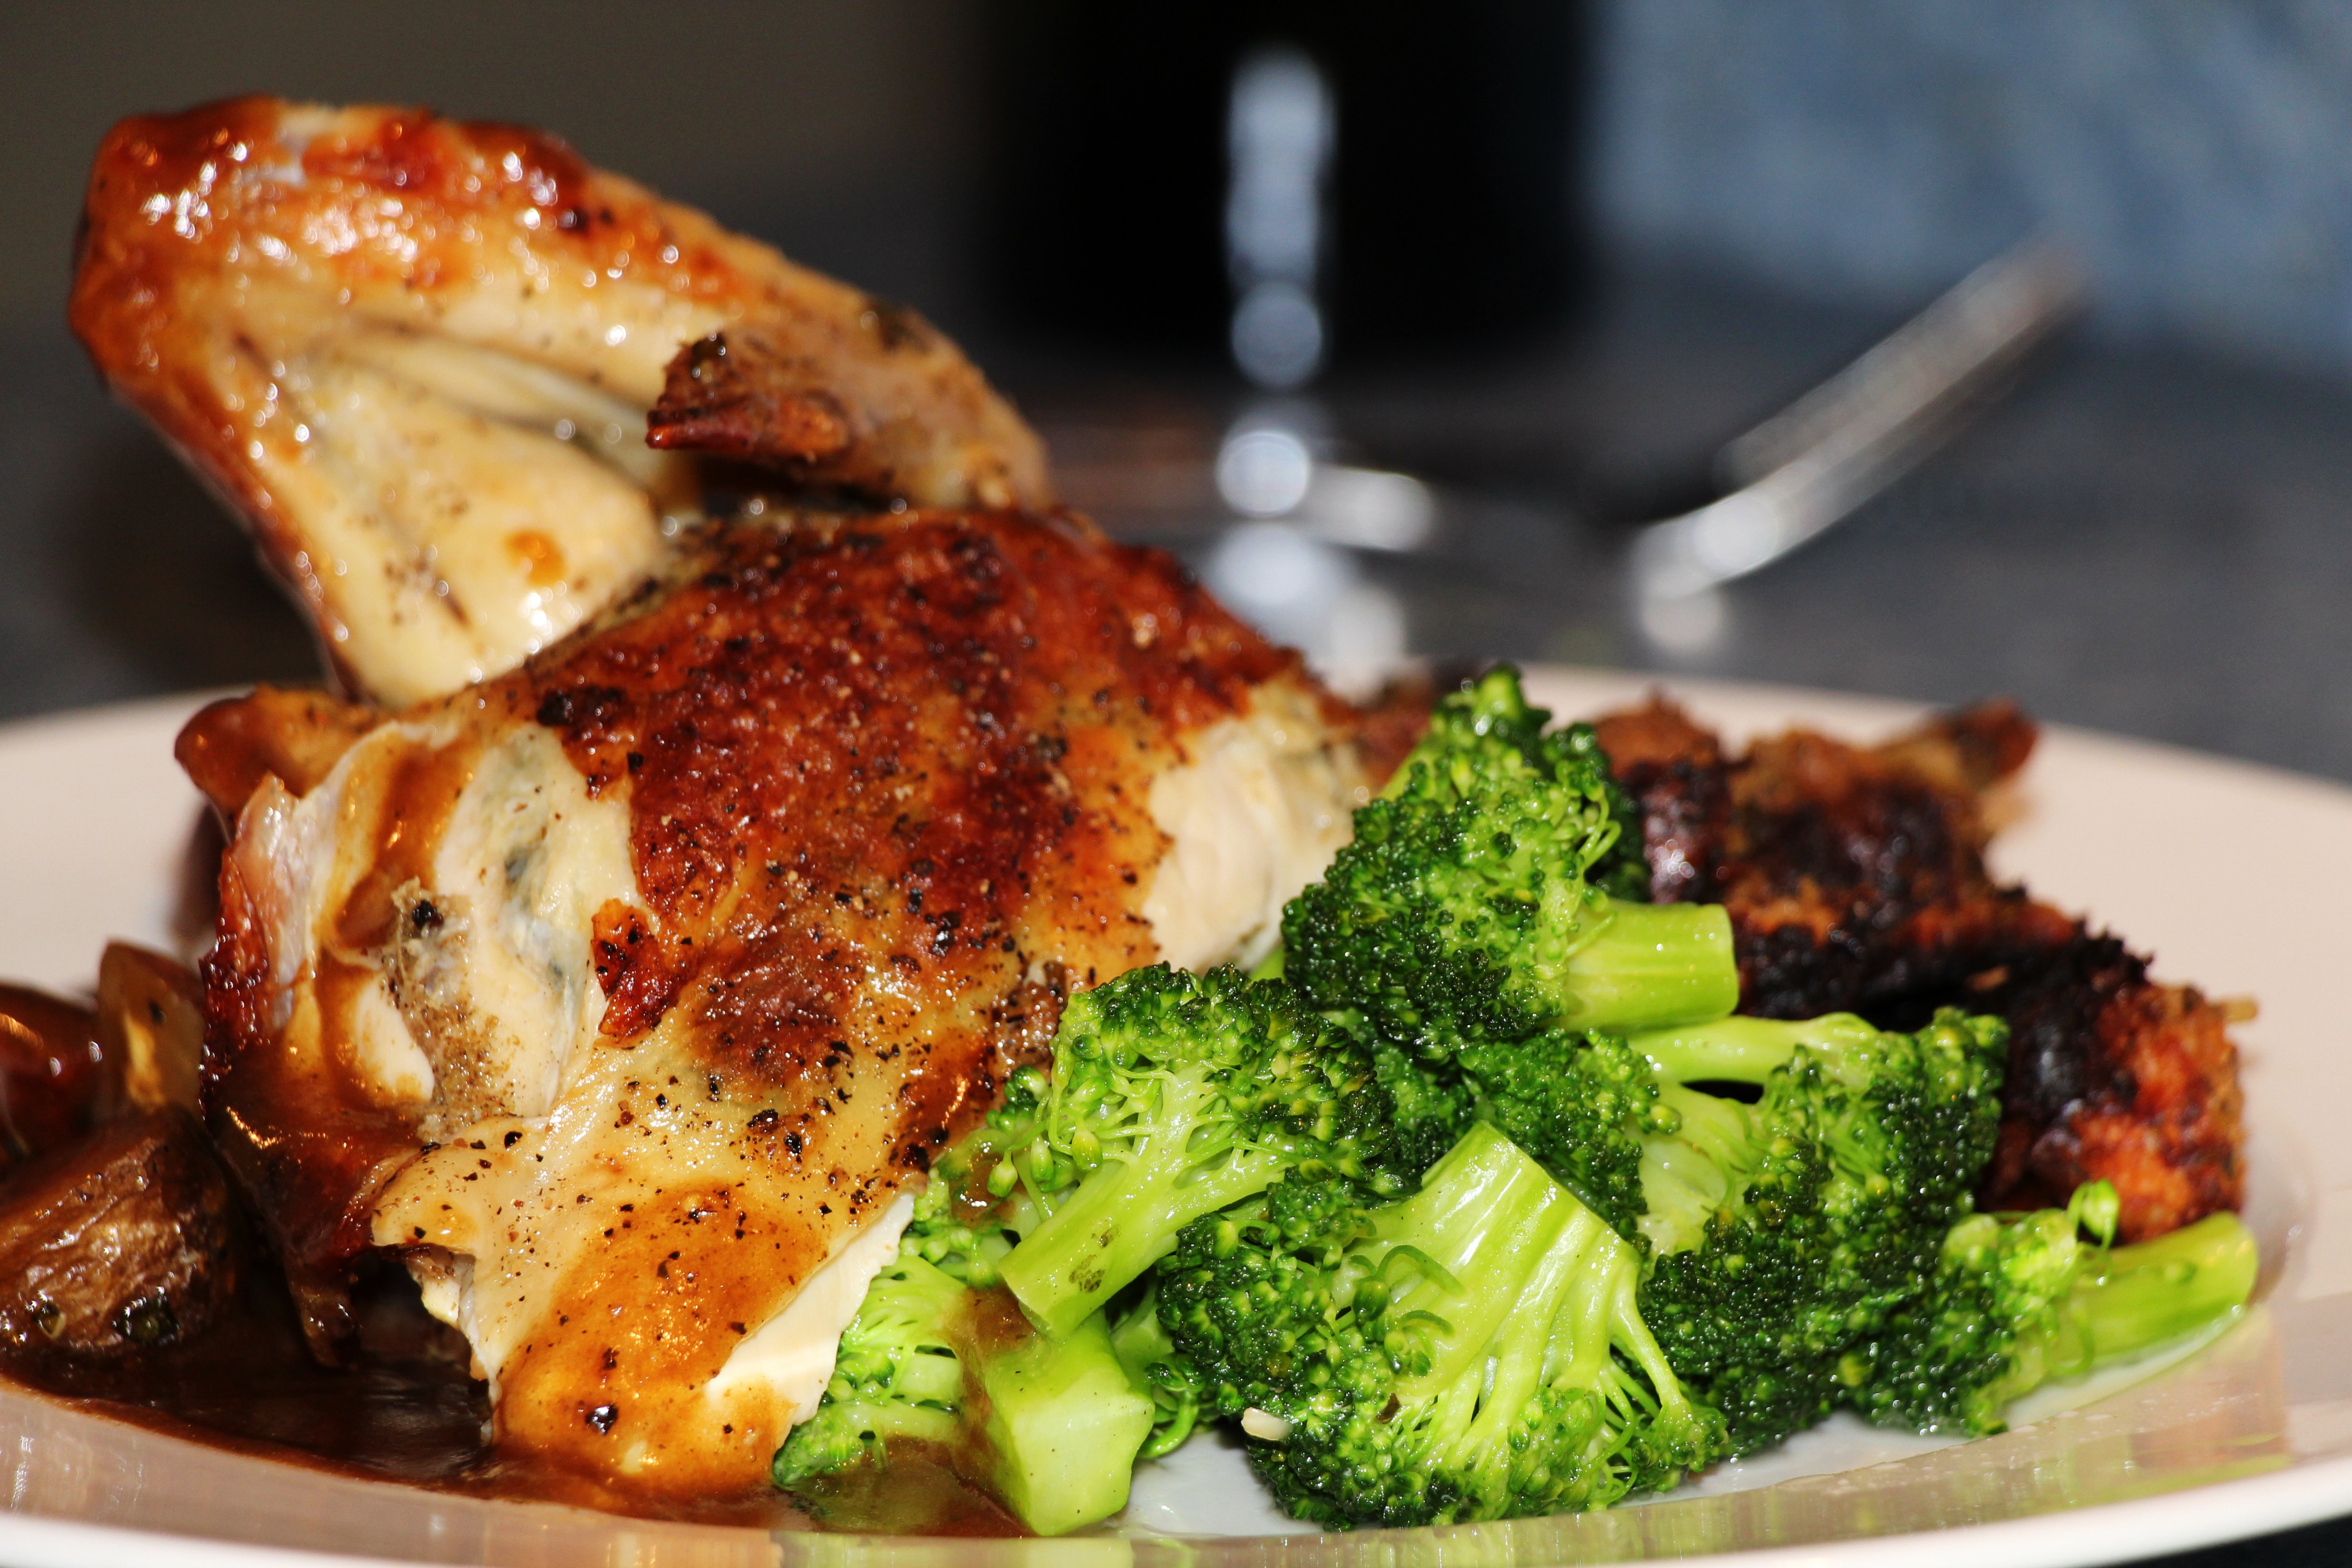 Roasted Chicken Dinner Plate, Broccoli, Demi Glace